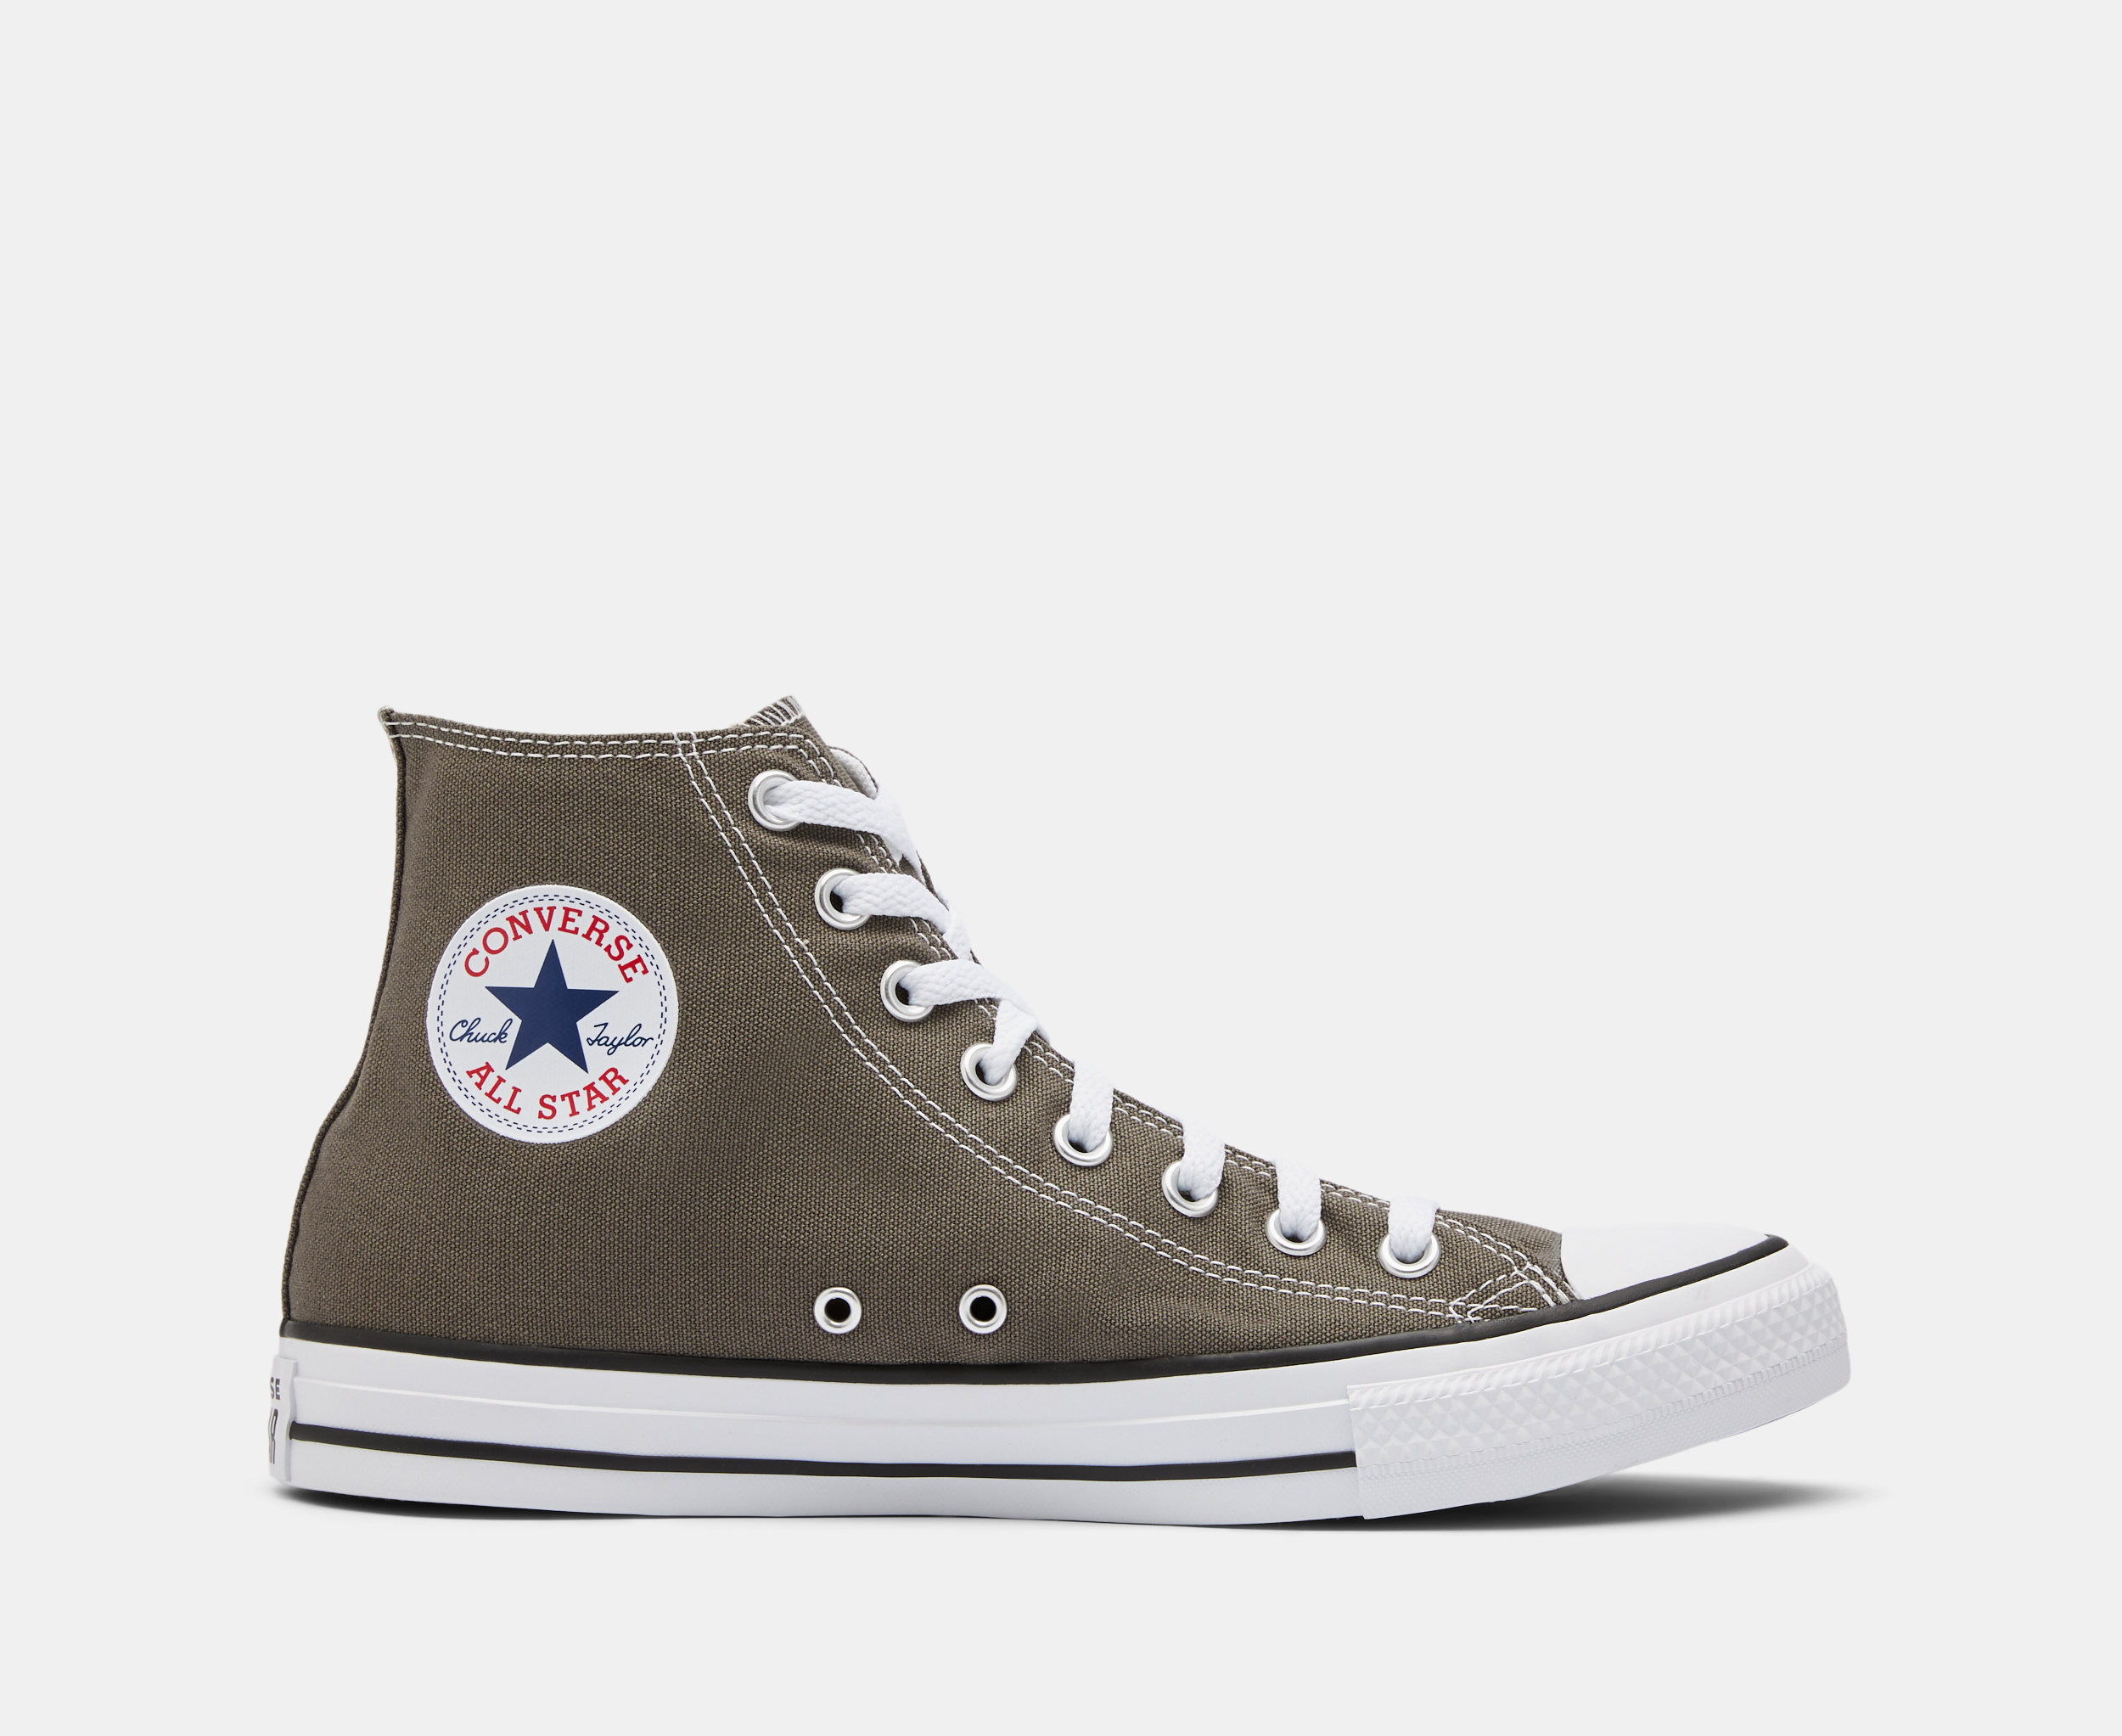 Converse Chuck Taylor Unisex All Star High Top Sneakers - Charcoal ...